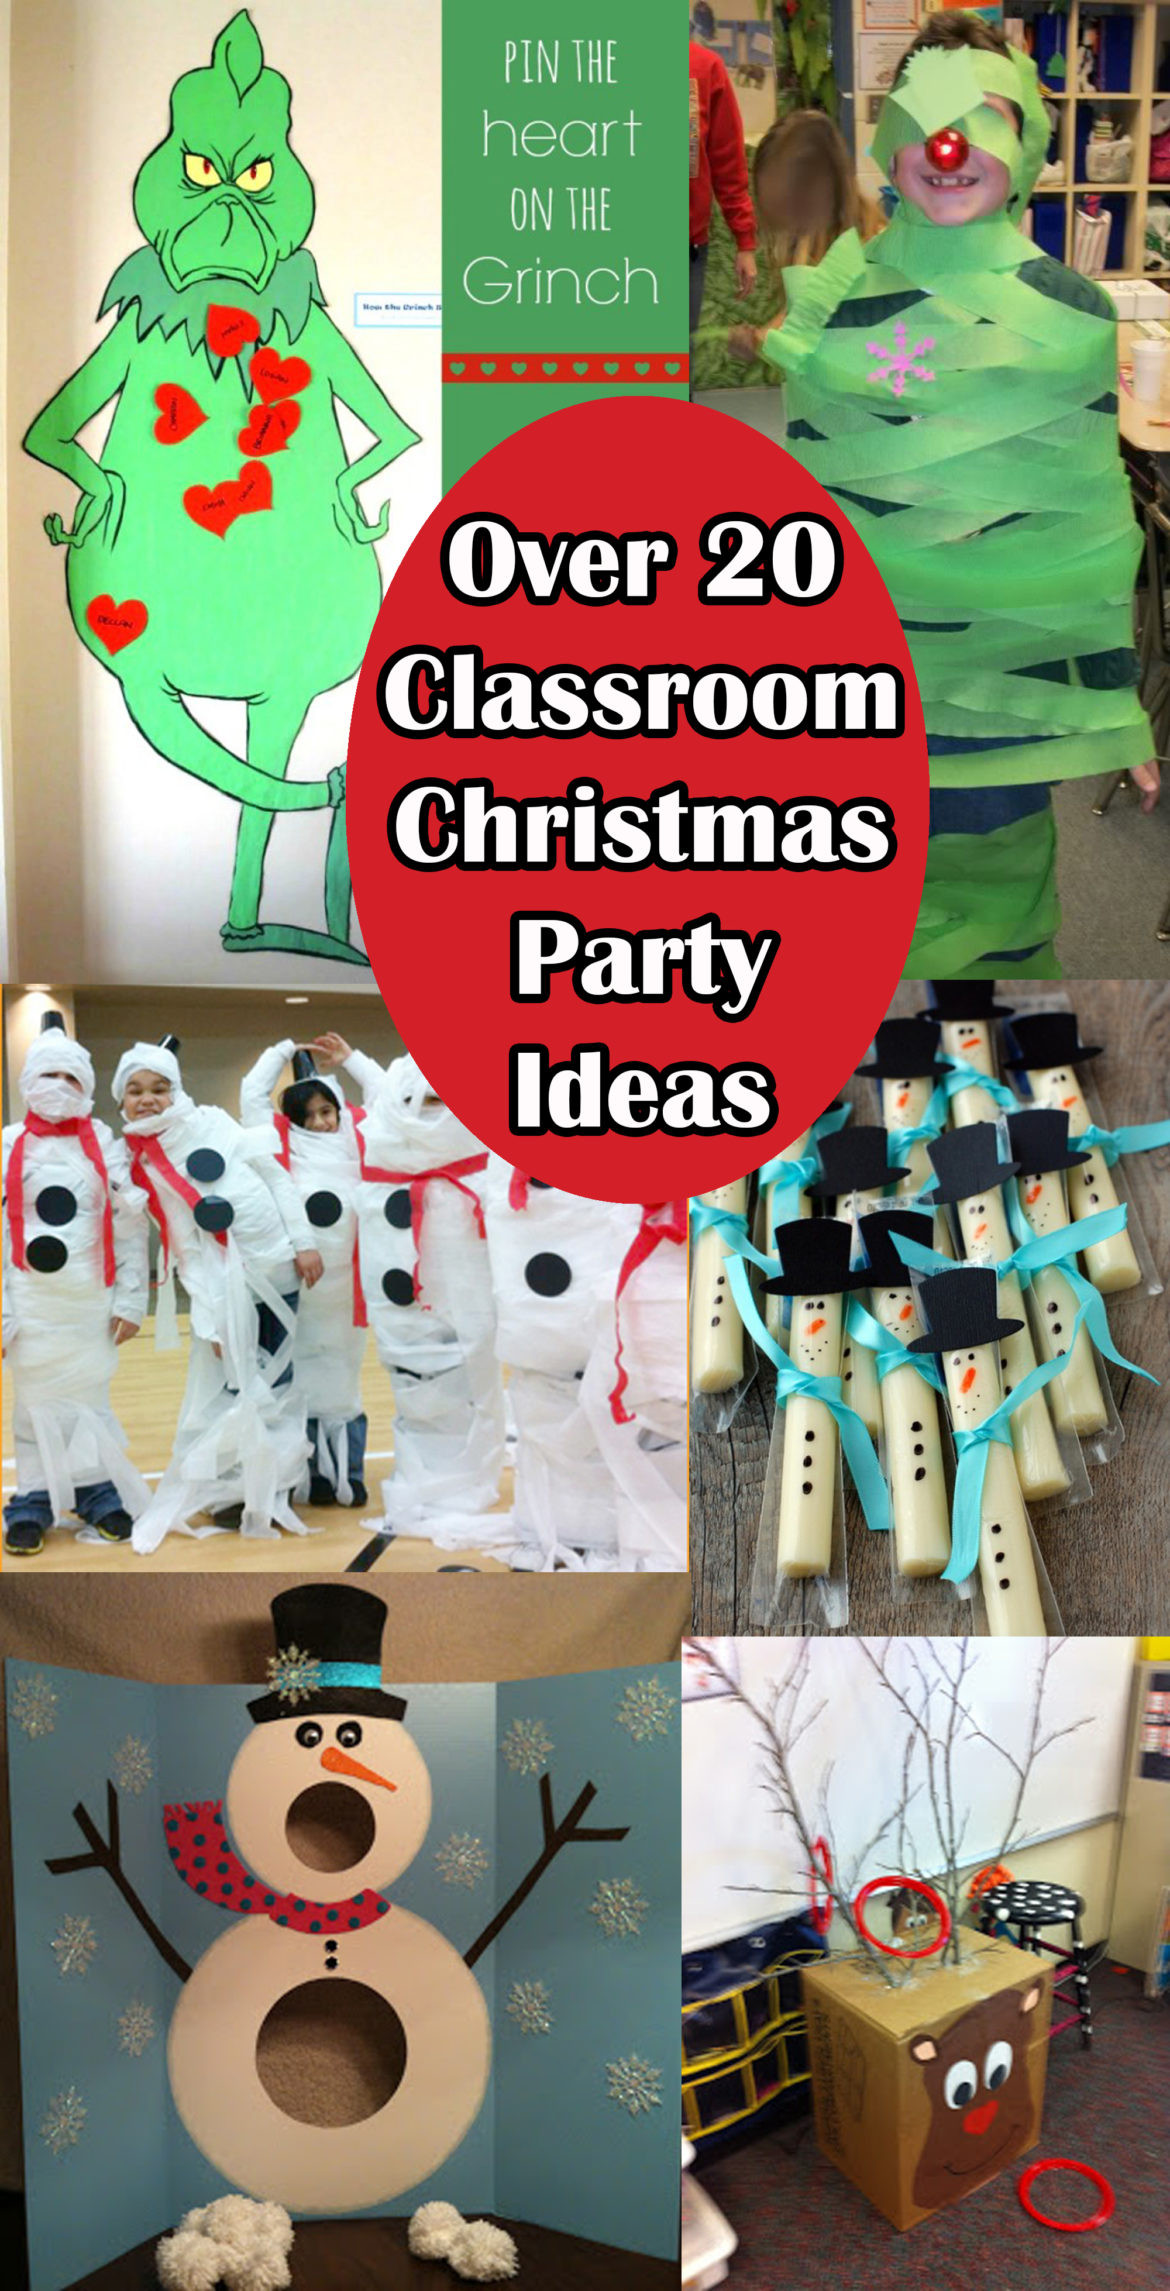 Kindergarten Holiday Party Ideas
 Classroom Christmas Party Ideas The Keeper of the Cheerios